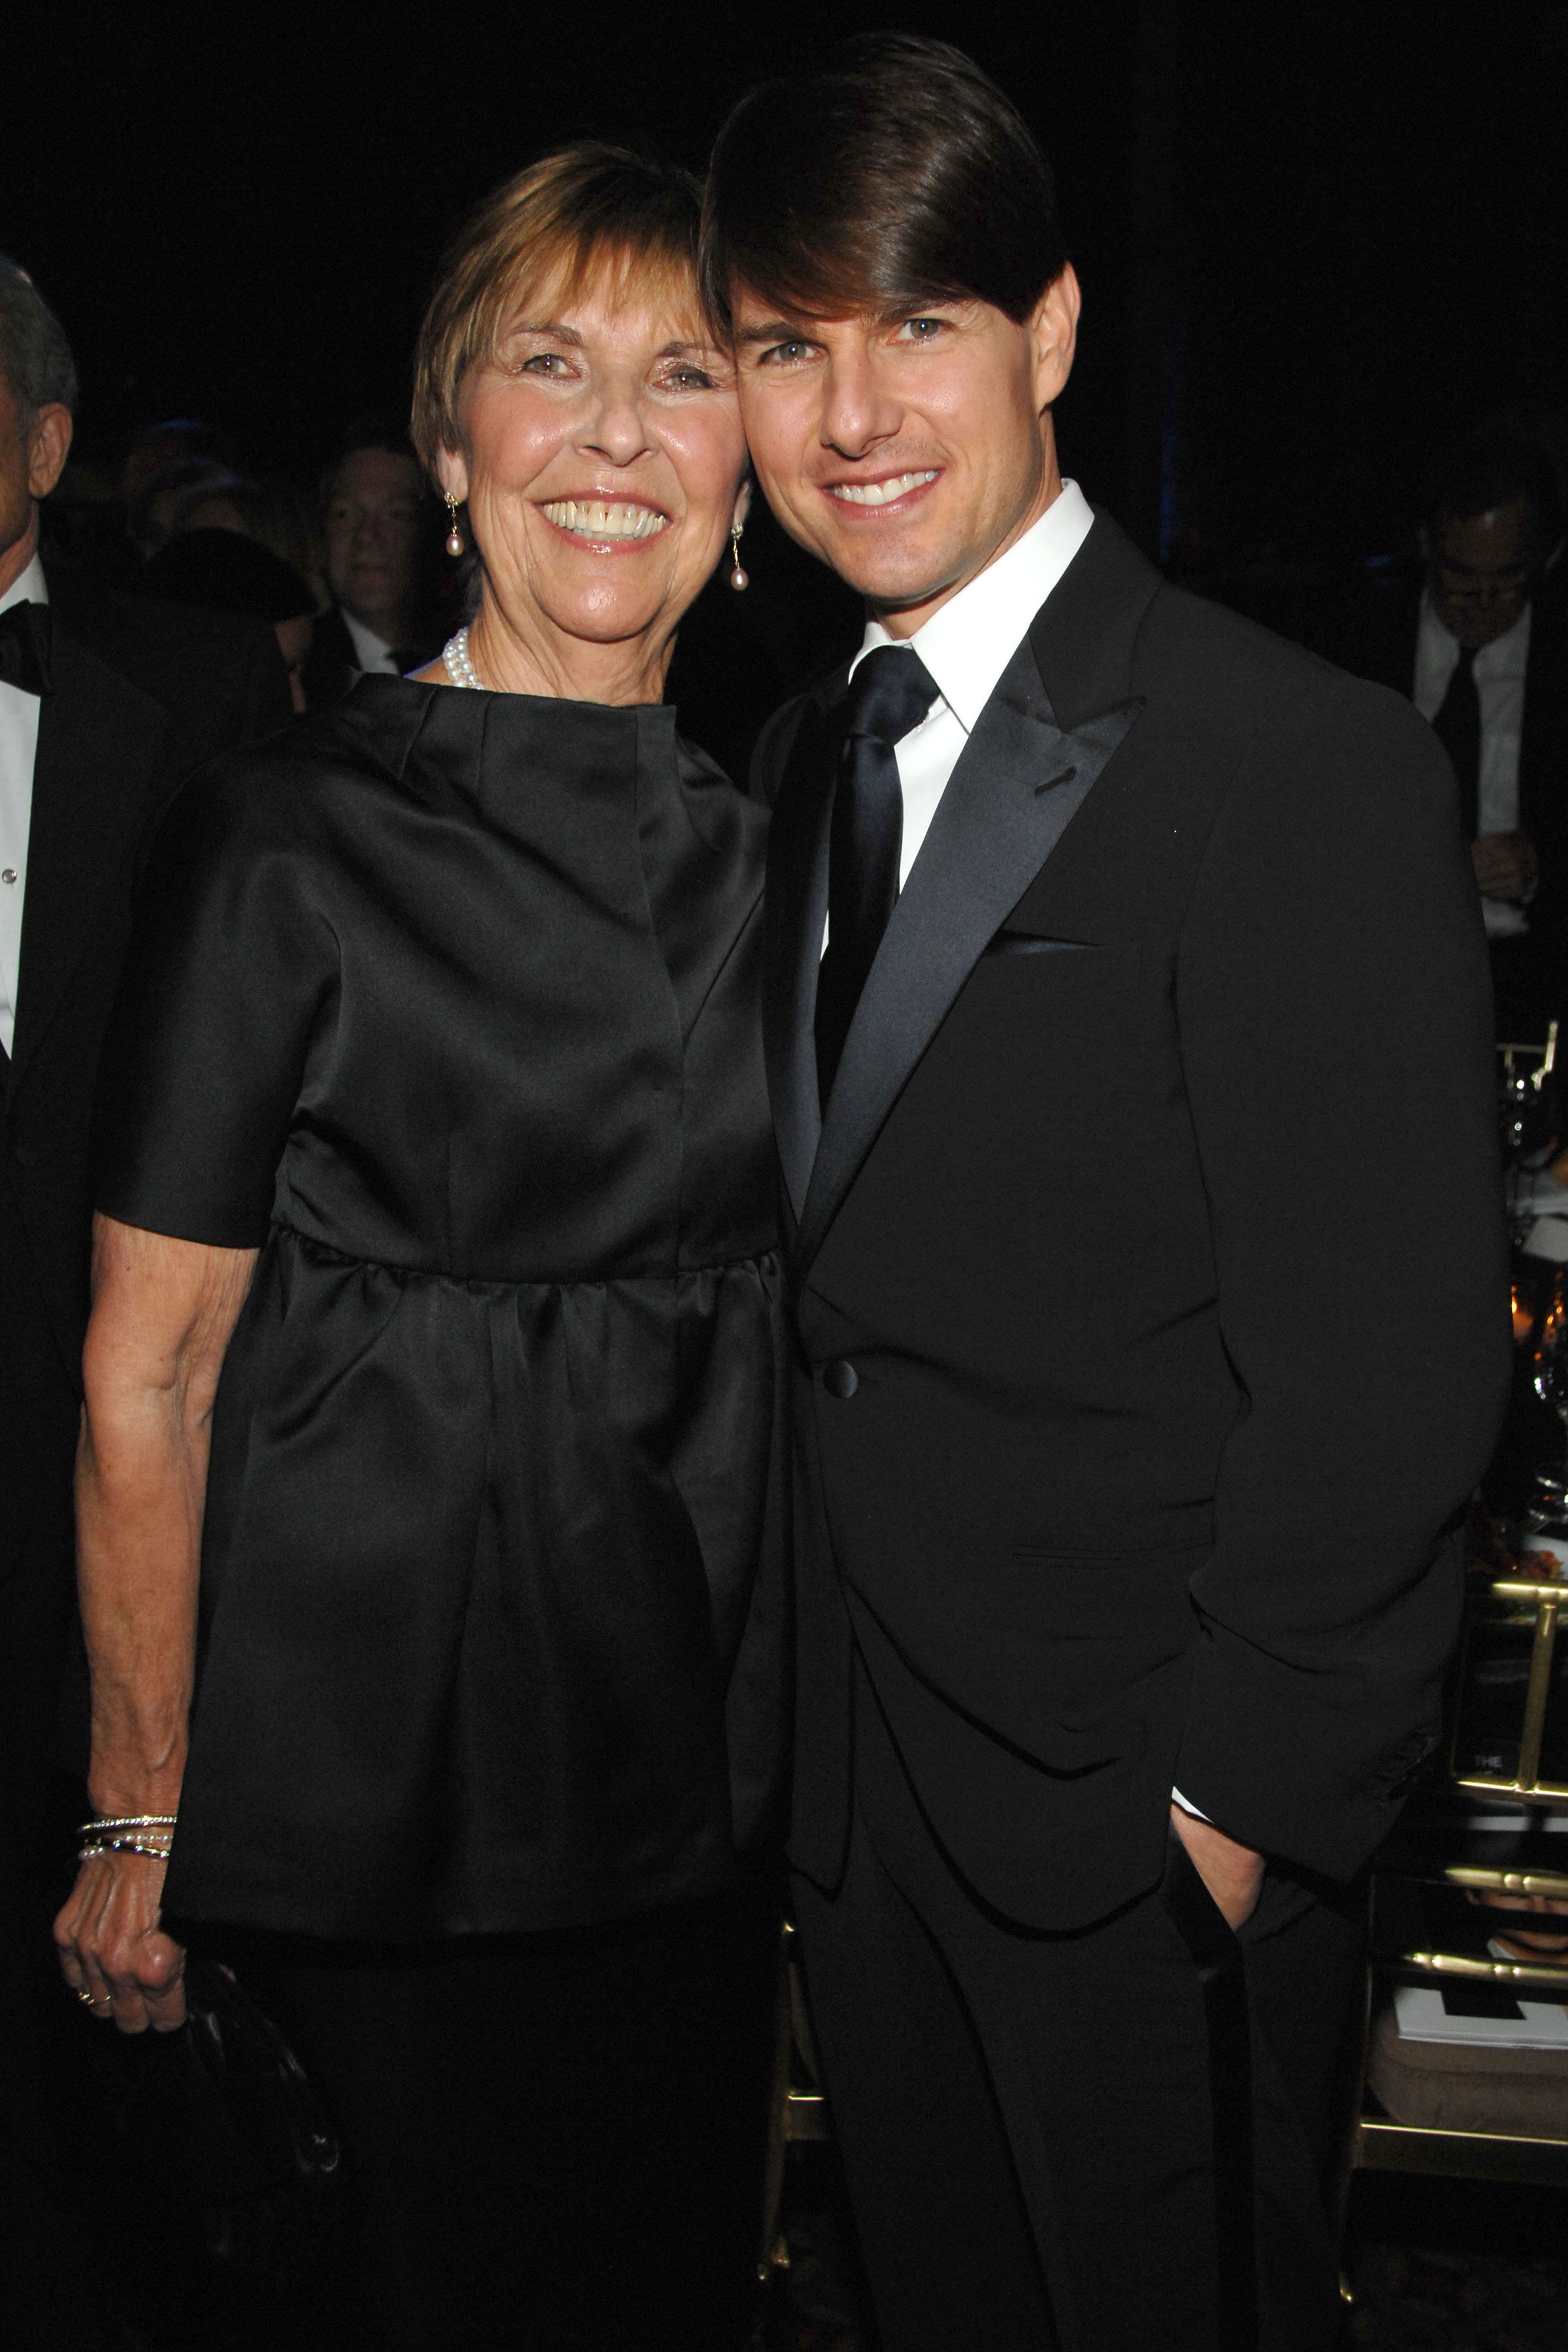 Mary Lee South et Tom Cruise assistent au MUSEUM OF THE MOVING IMAGE SALUTES TOM CRUISE à New York, le 6 novembre 2007. | Source : Getty Images